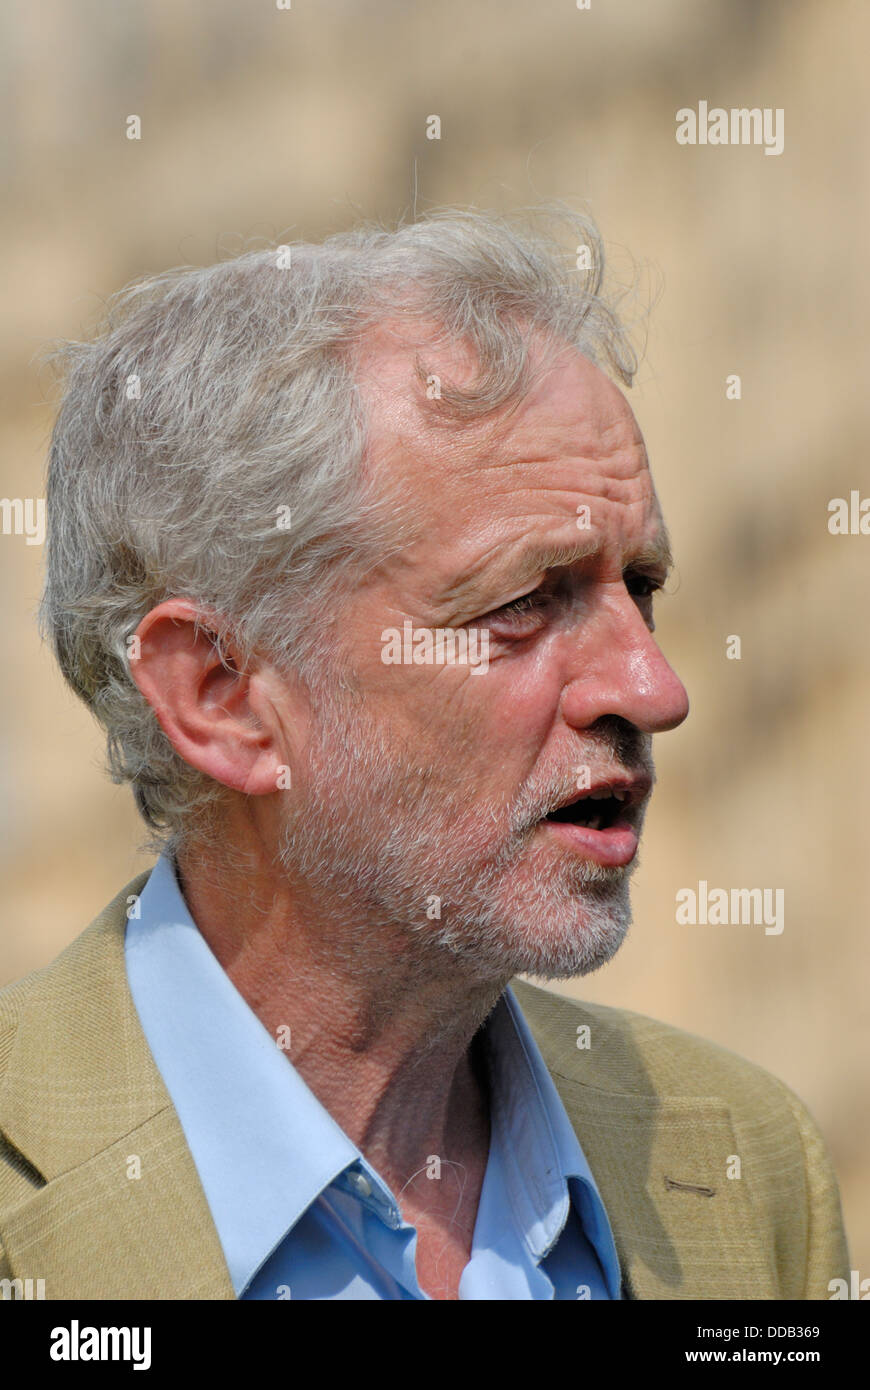 Jeremy Corbyn MP (Labour) being interviewed outside Parliament Stock Photo